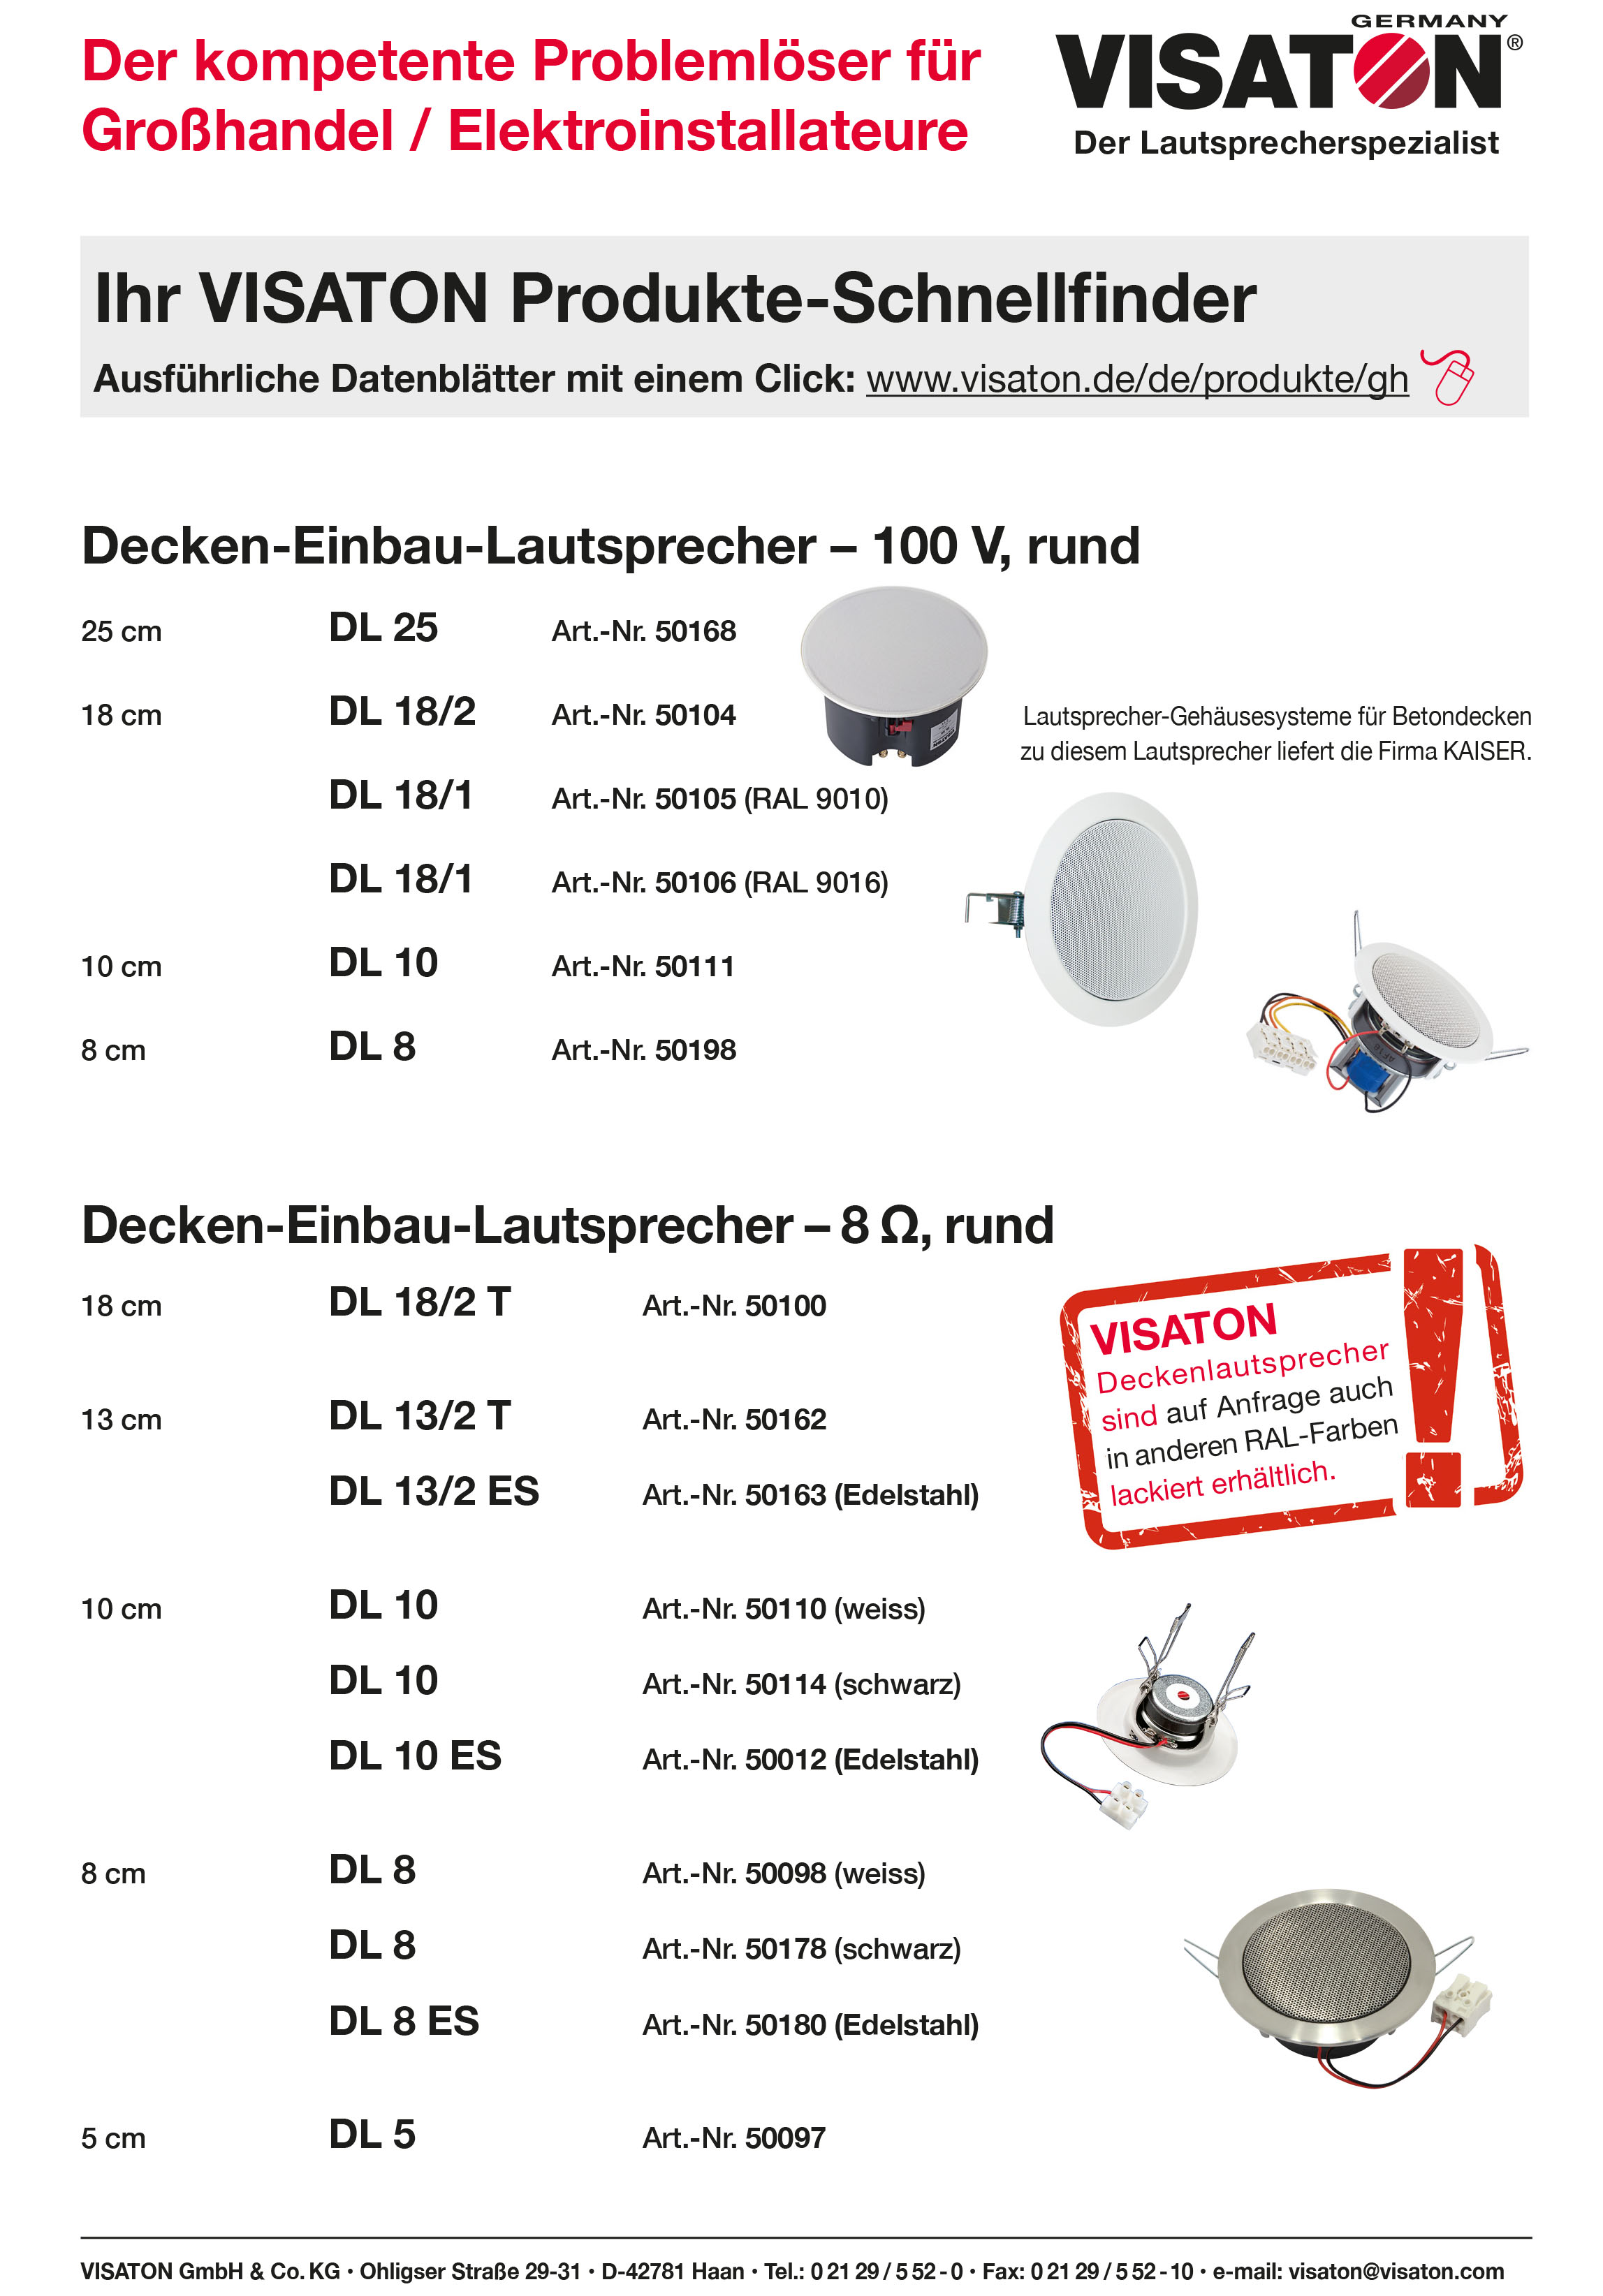 Großhandel / Elektroinstallateure (only available in German language)